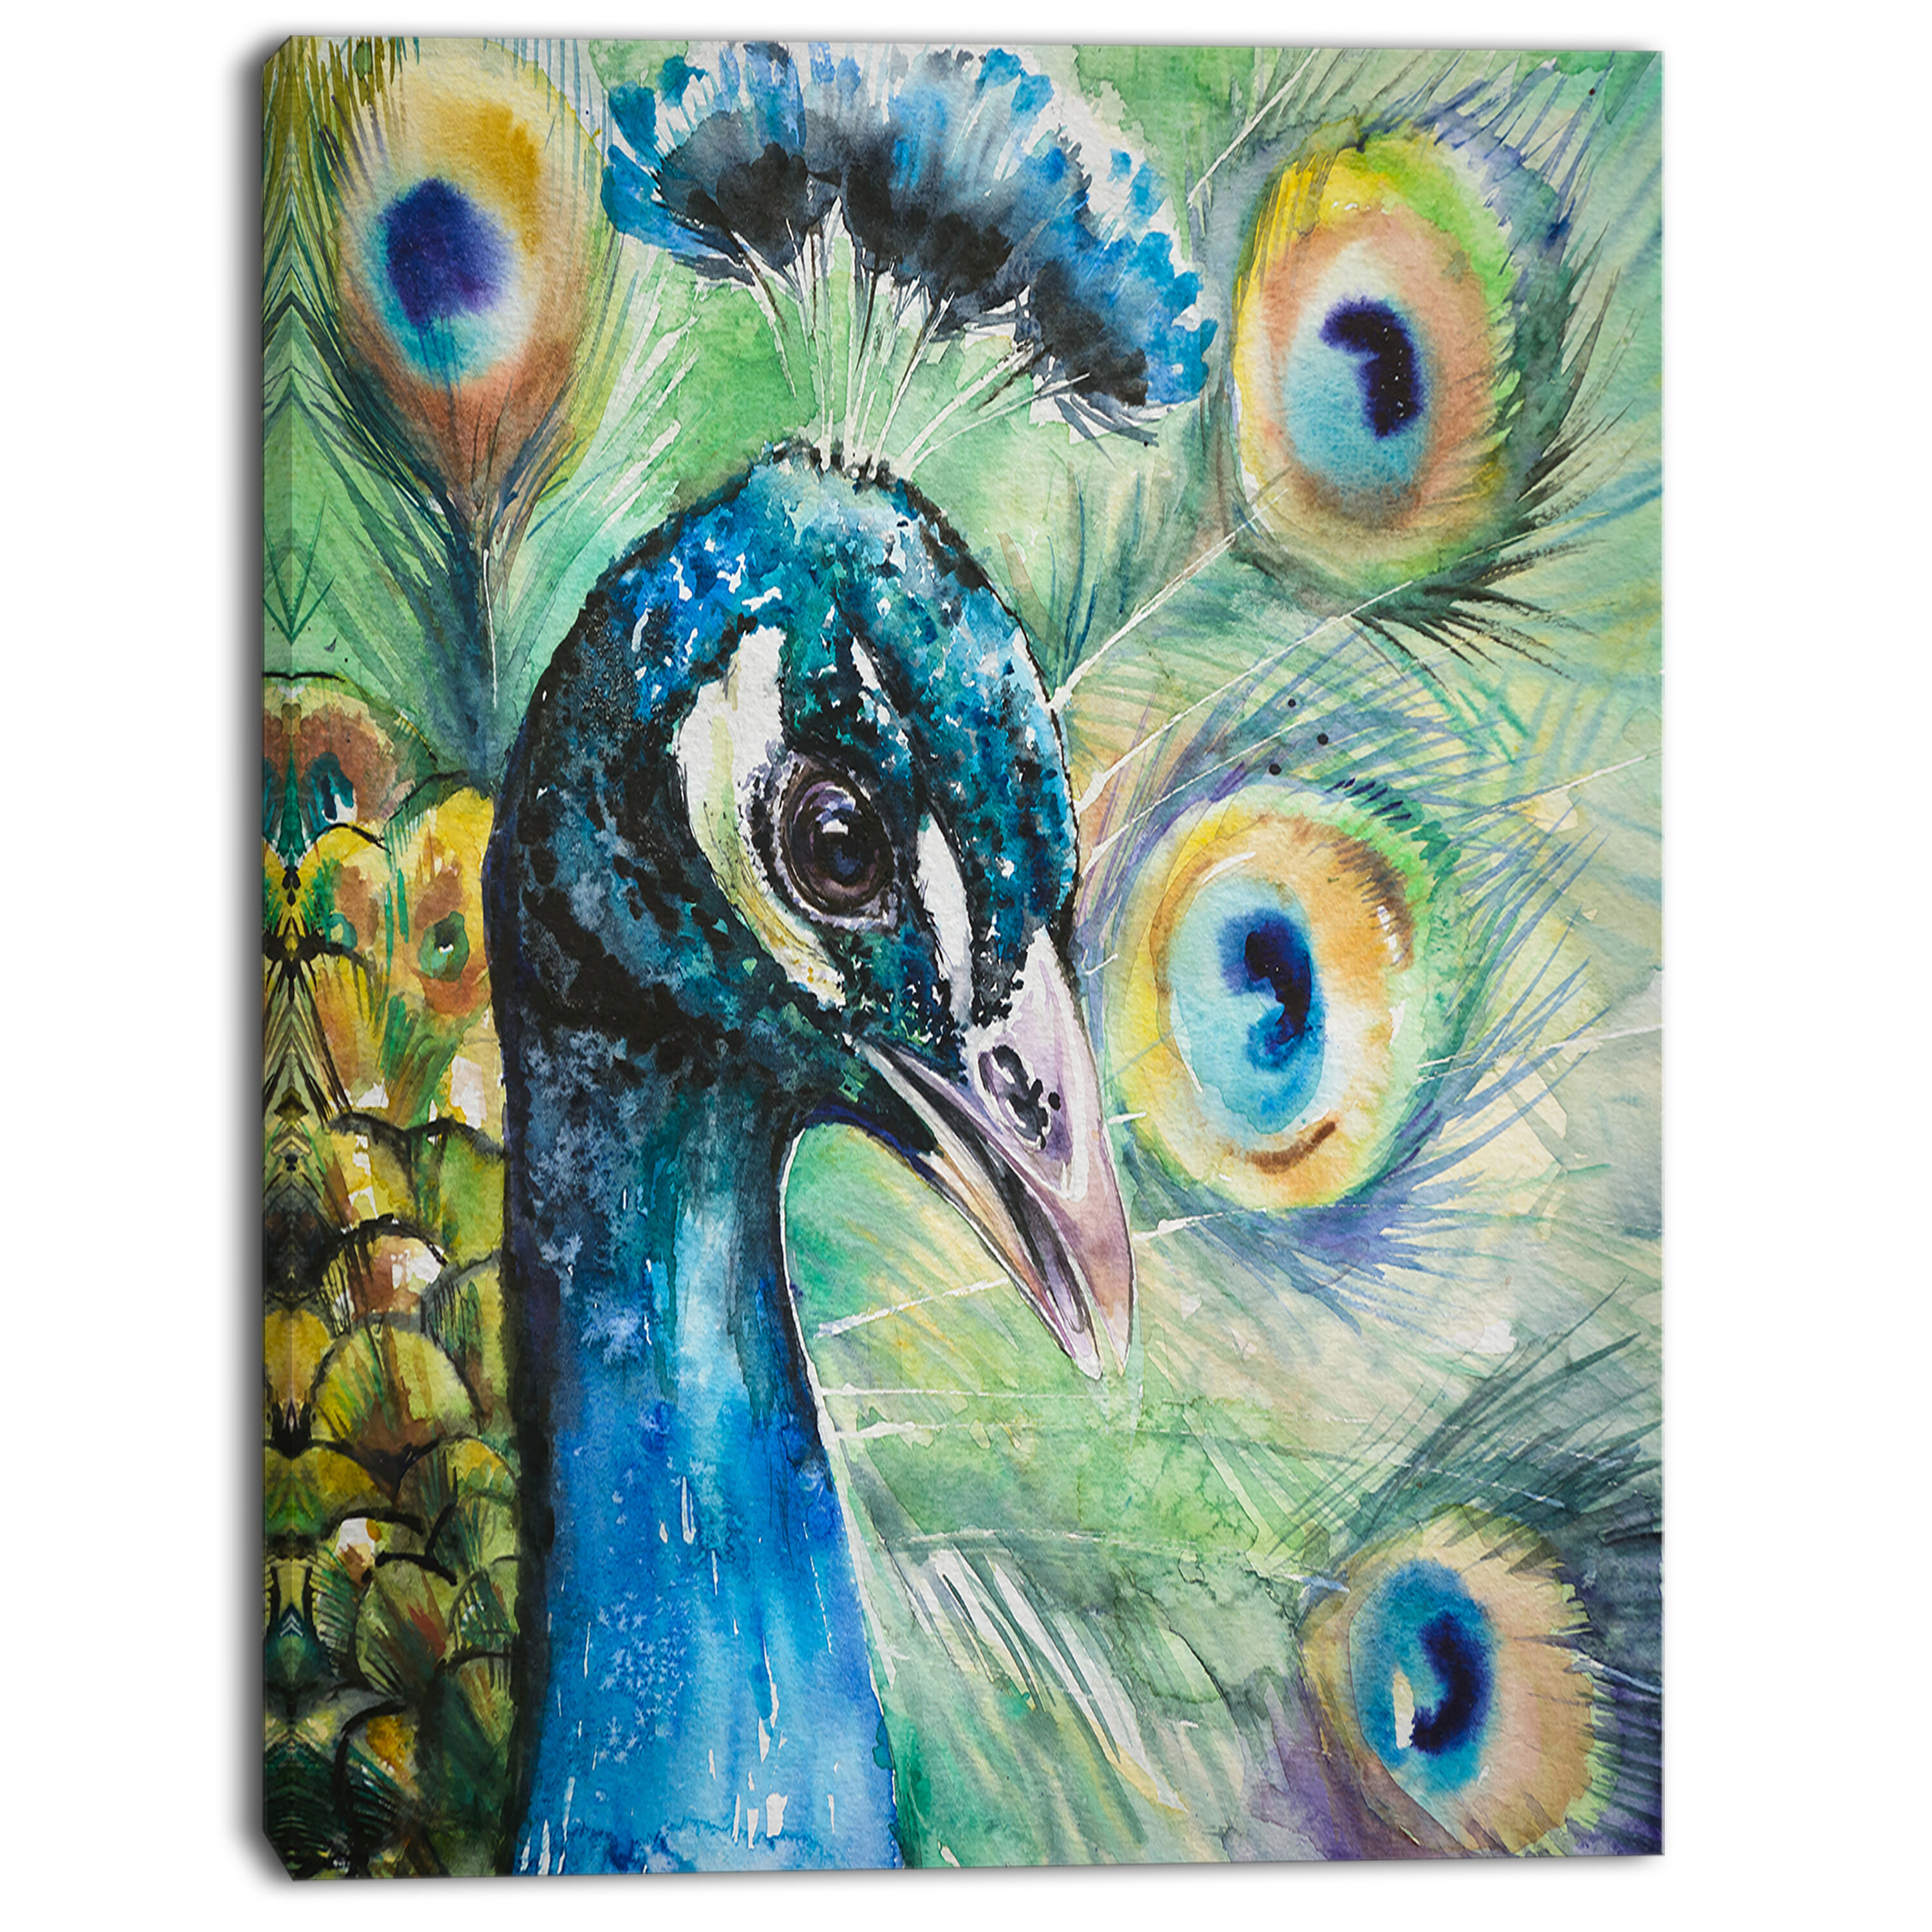 Large Modern Contemporary Canvas Wall Art Print Painting Animal Peacock Peafowl 